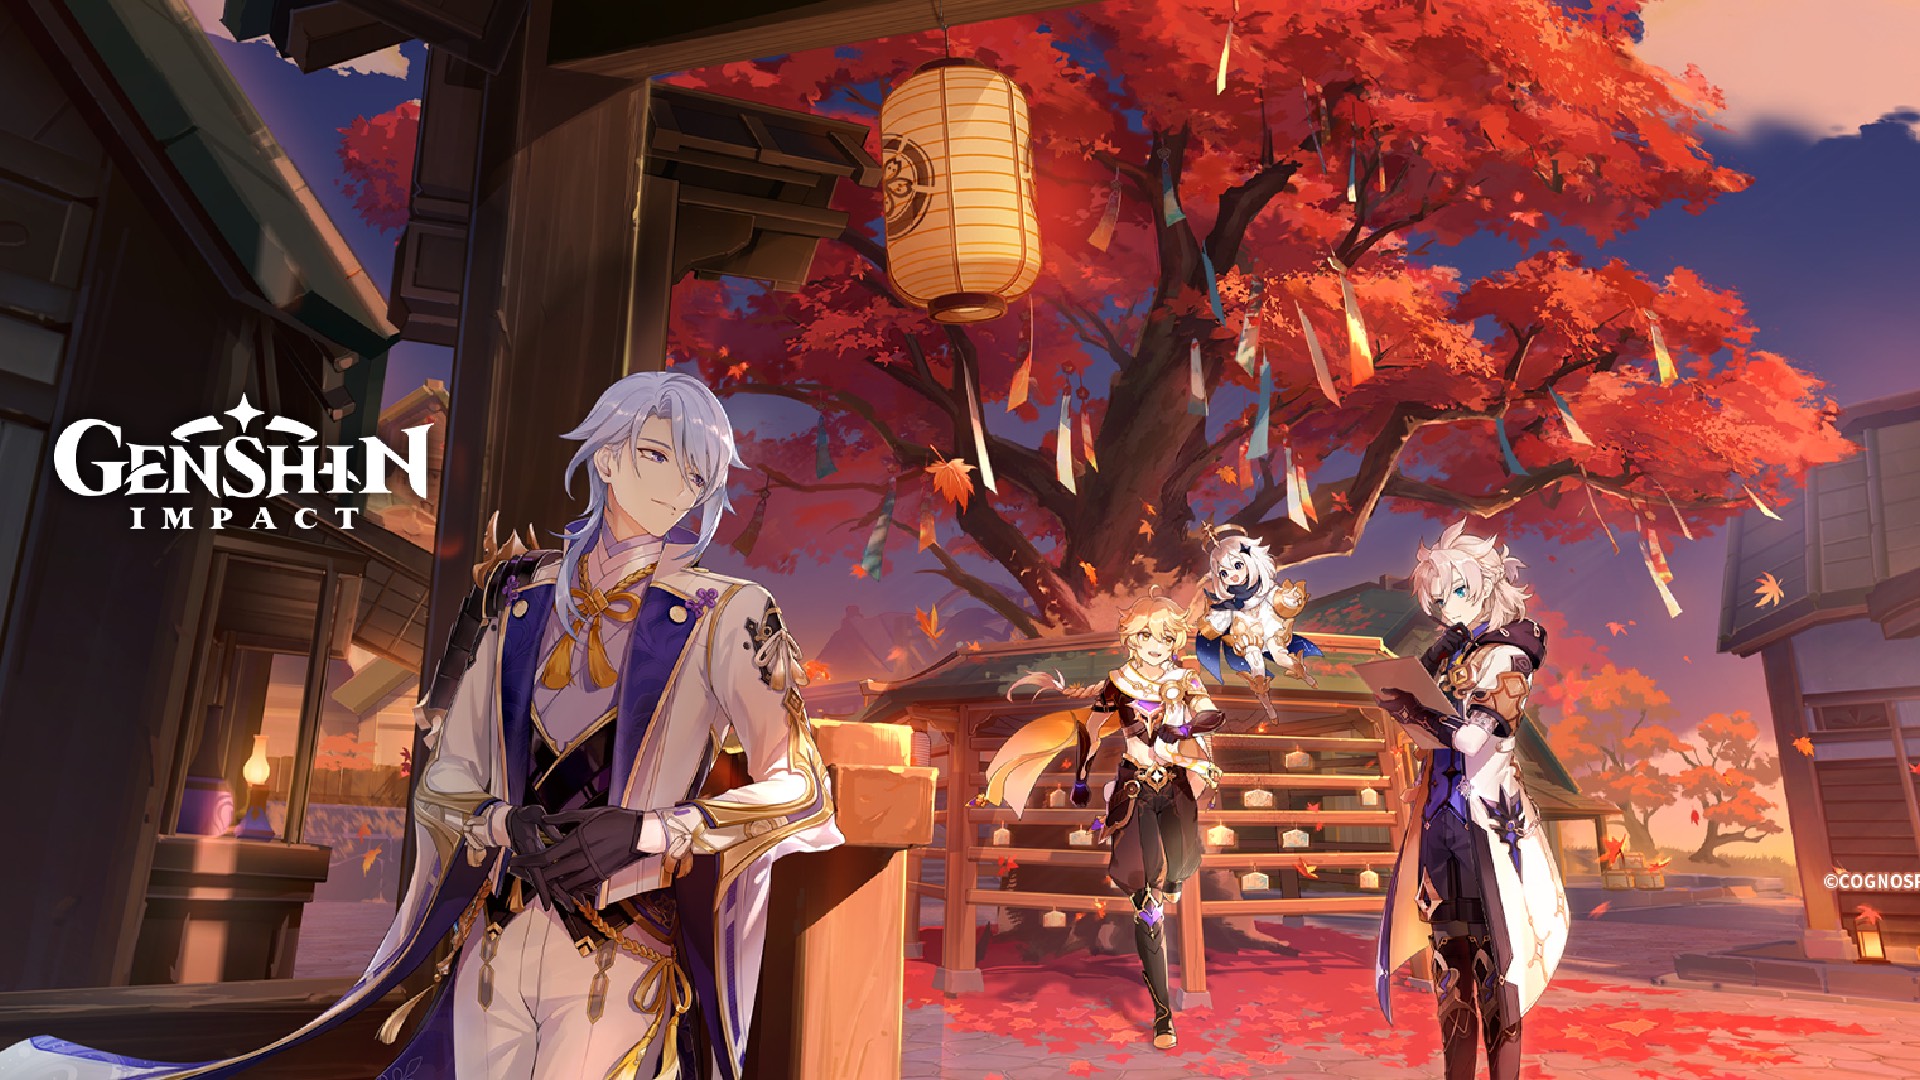 Genshin Impact characters stand under a red tree